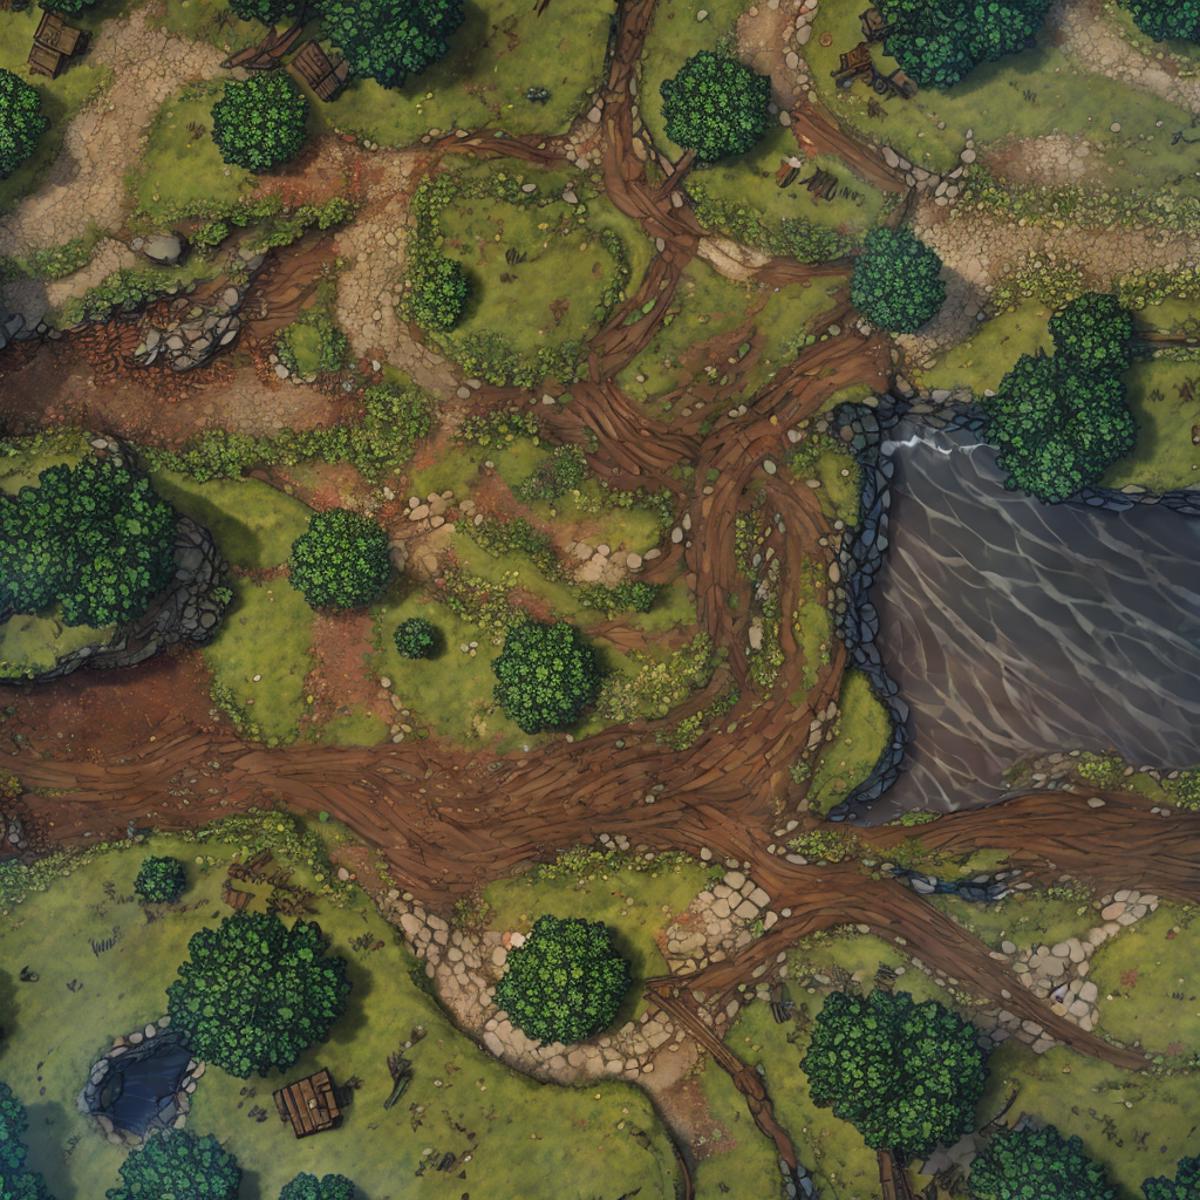 BattleMaps image by Rousk